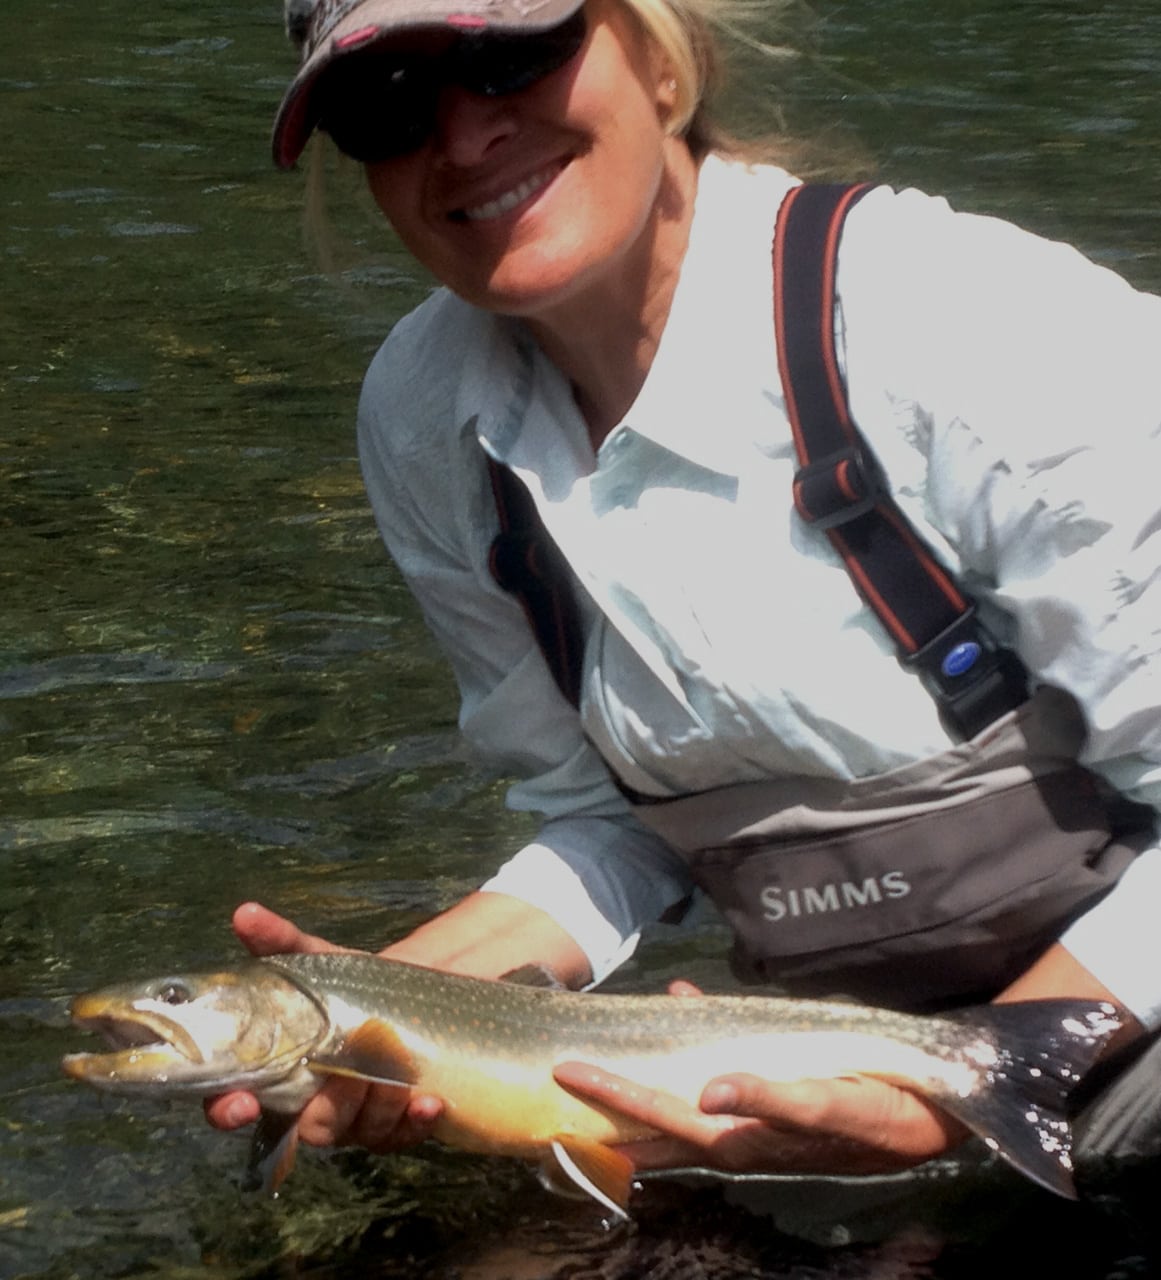 We are hearing that a number of people are catching bulltrout on the Skagit